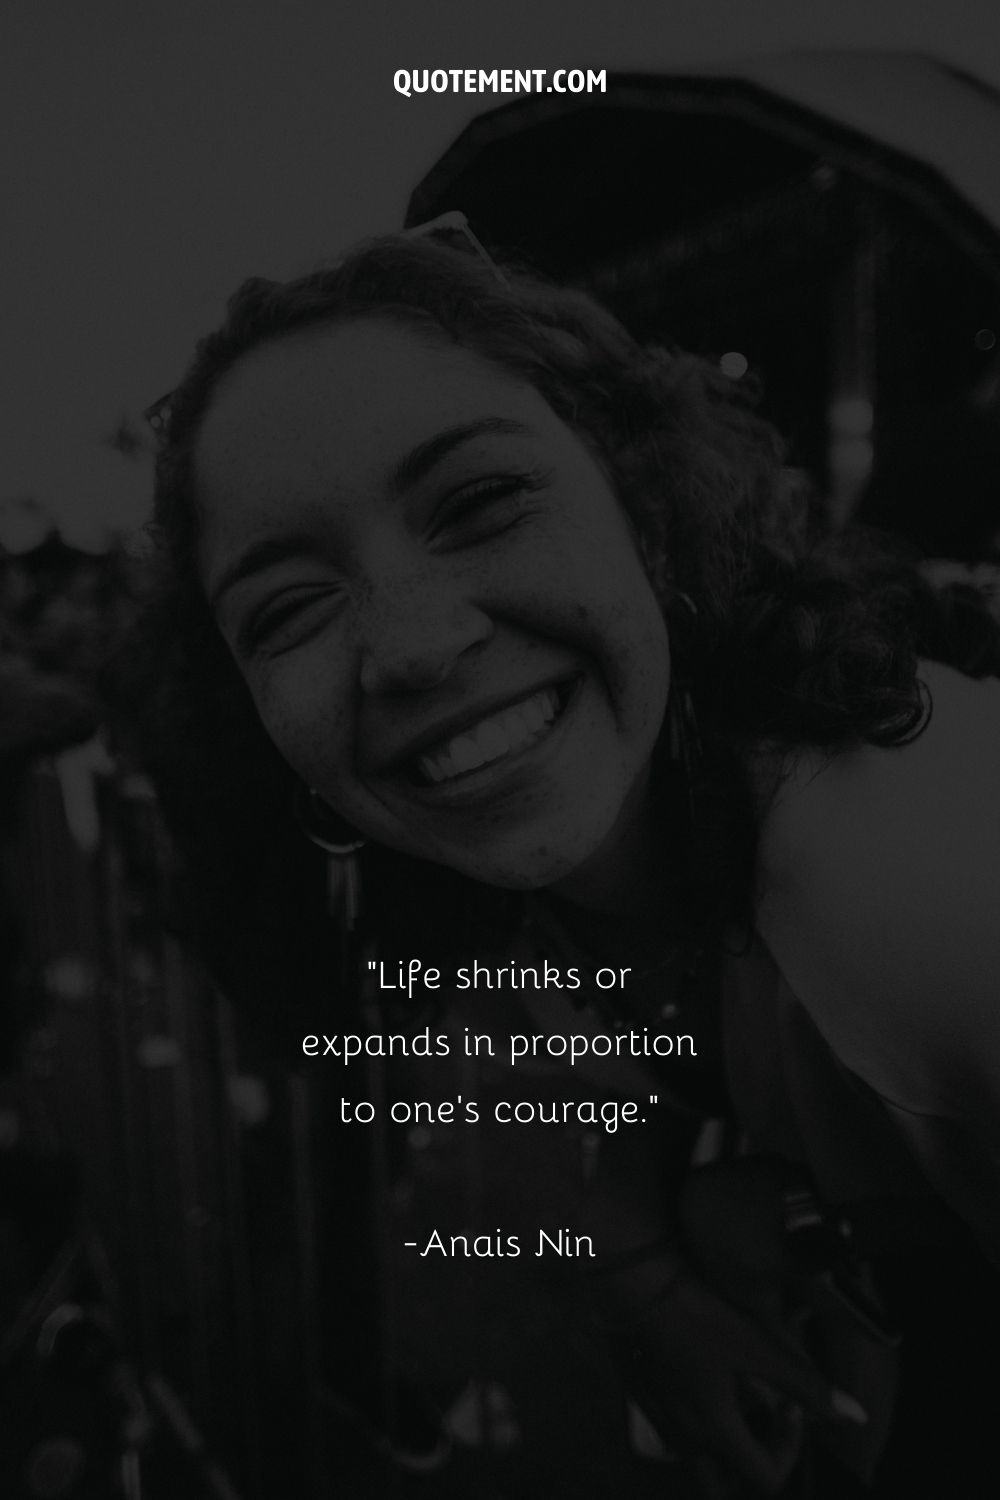 Image of a young girl laughing representing a quote by Anais Nin
